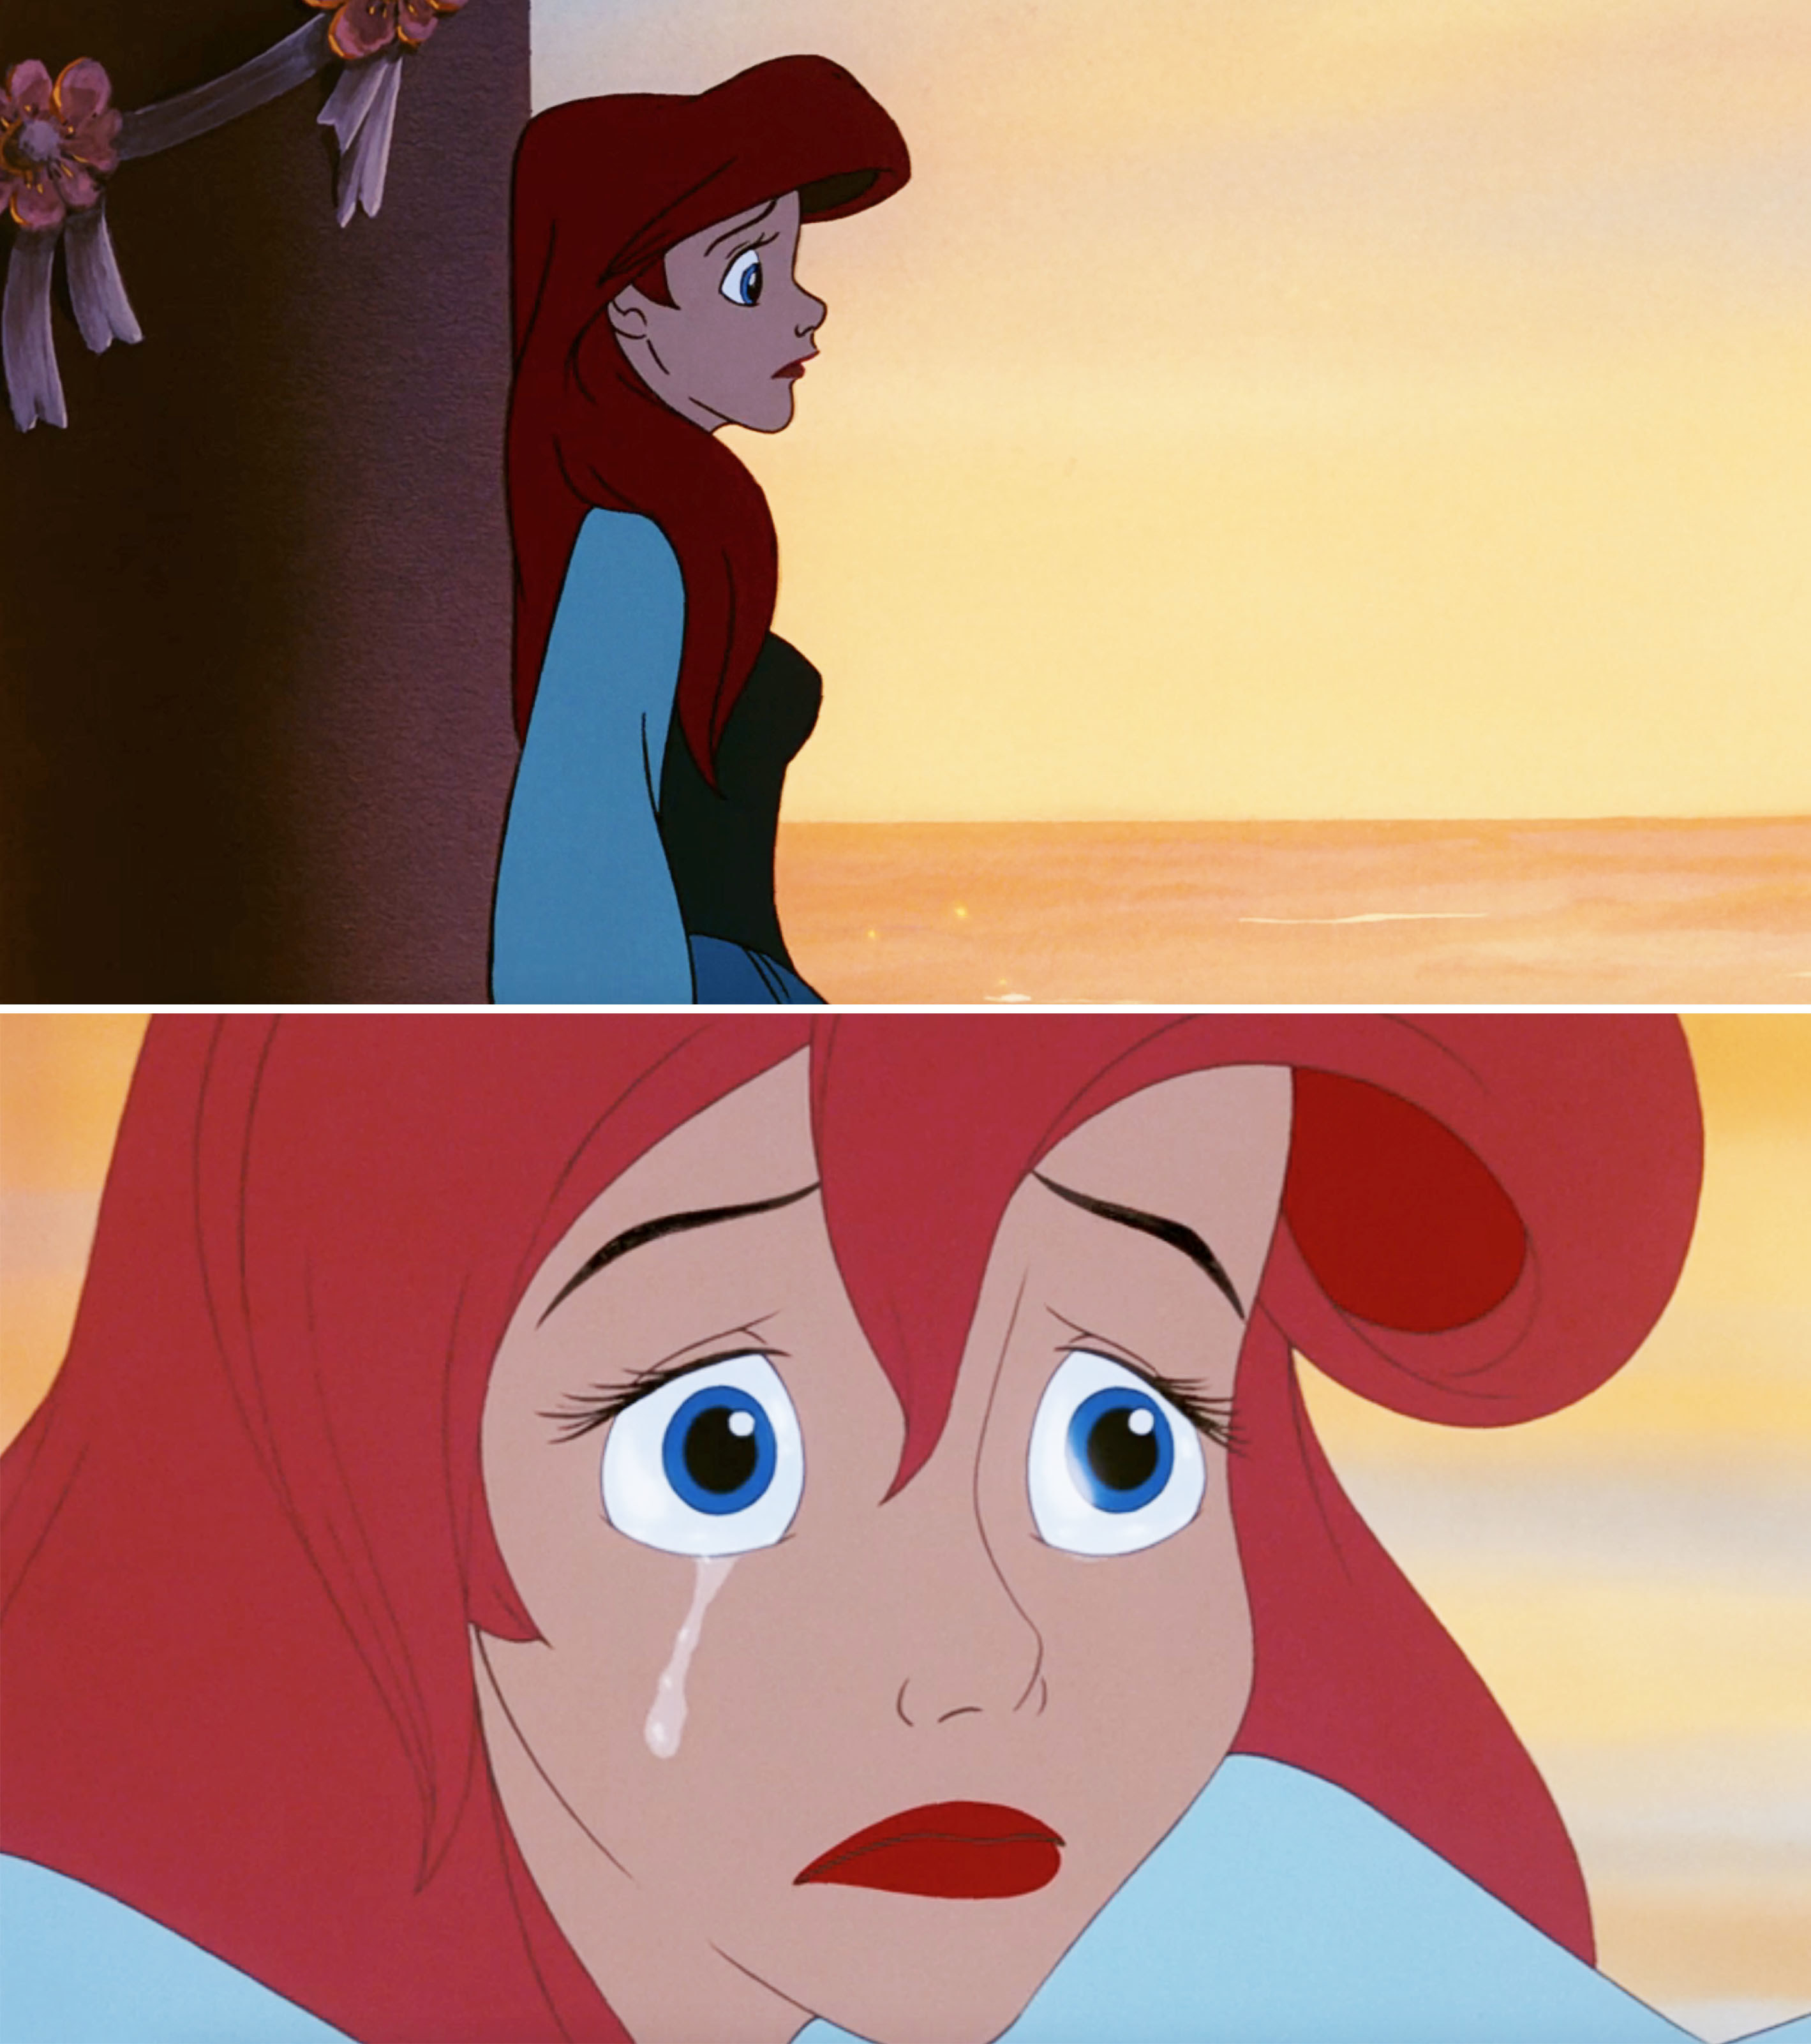 Screenshot from &quot;The Little Mermaid&quot;